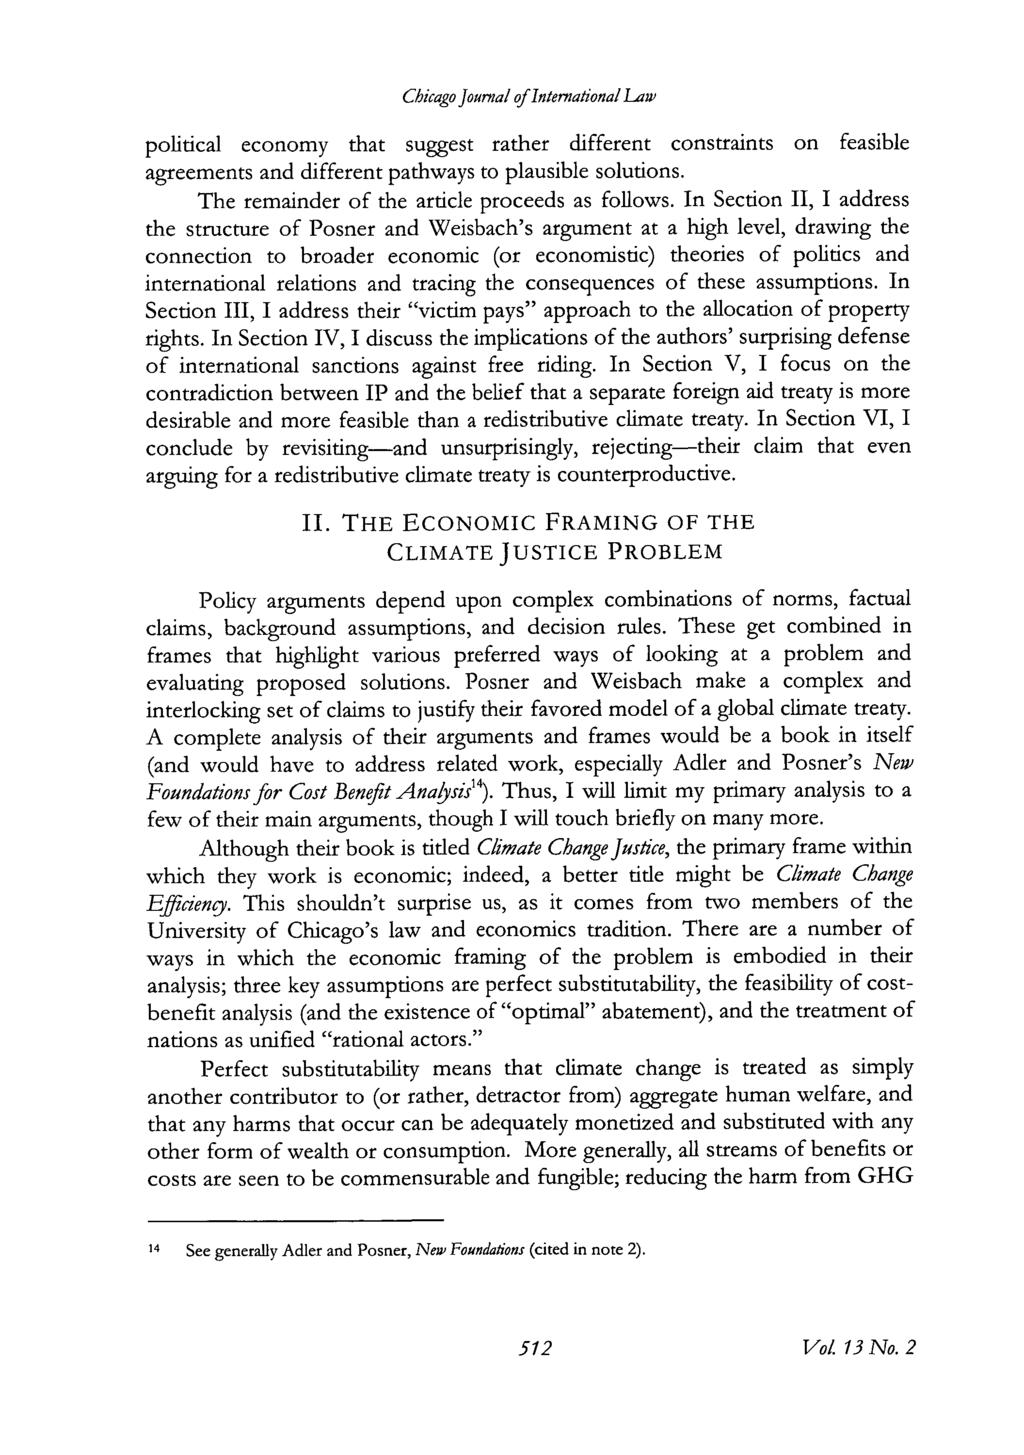 Chicago Journal of International Law political economy that suggest rather different constraints on feasible agreements and different pathways to plausible solutions.